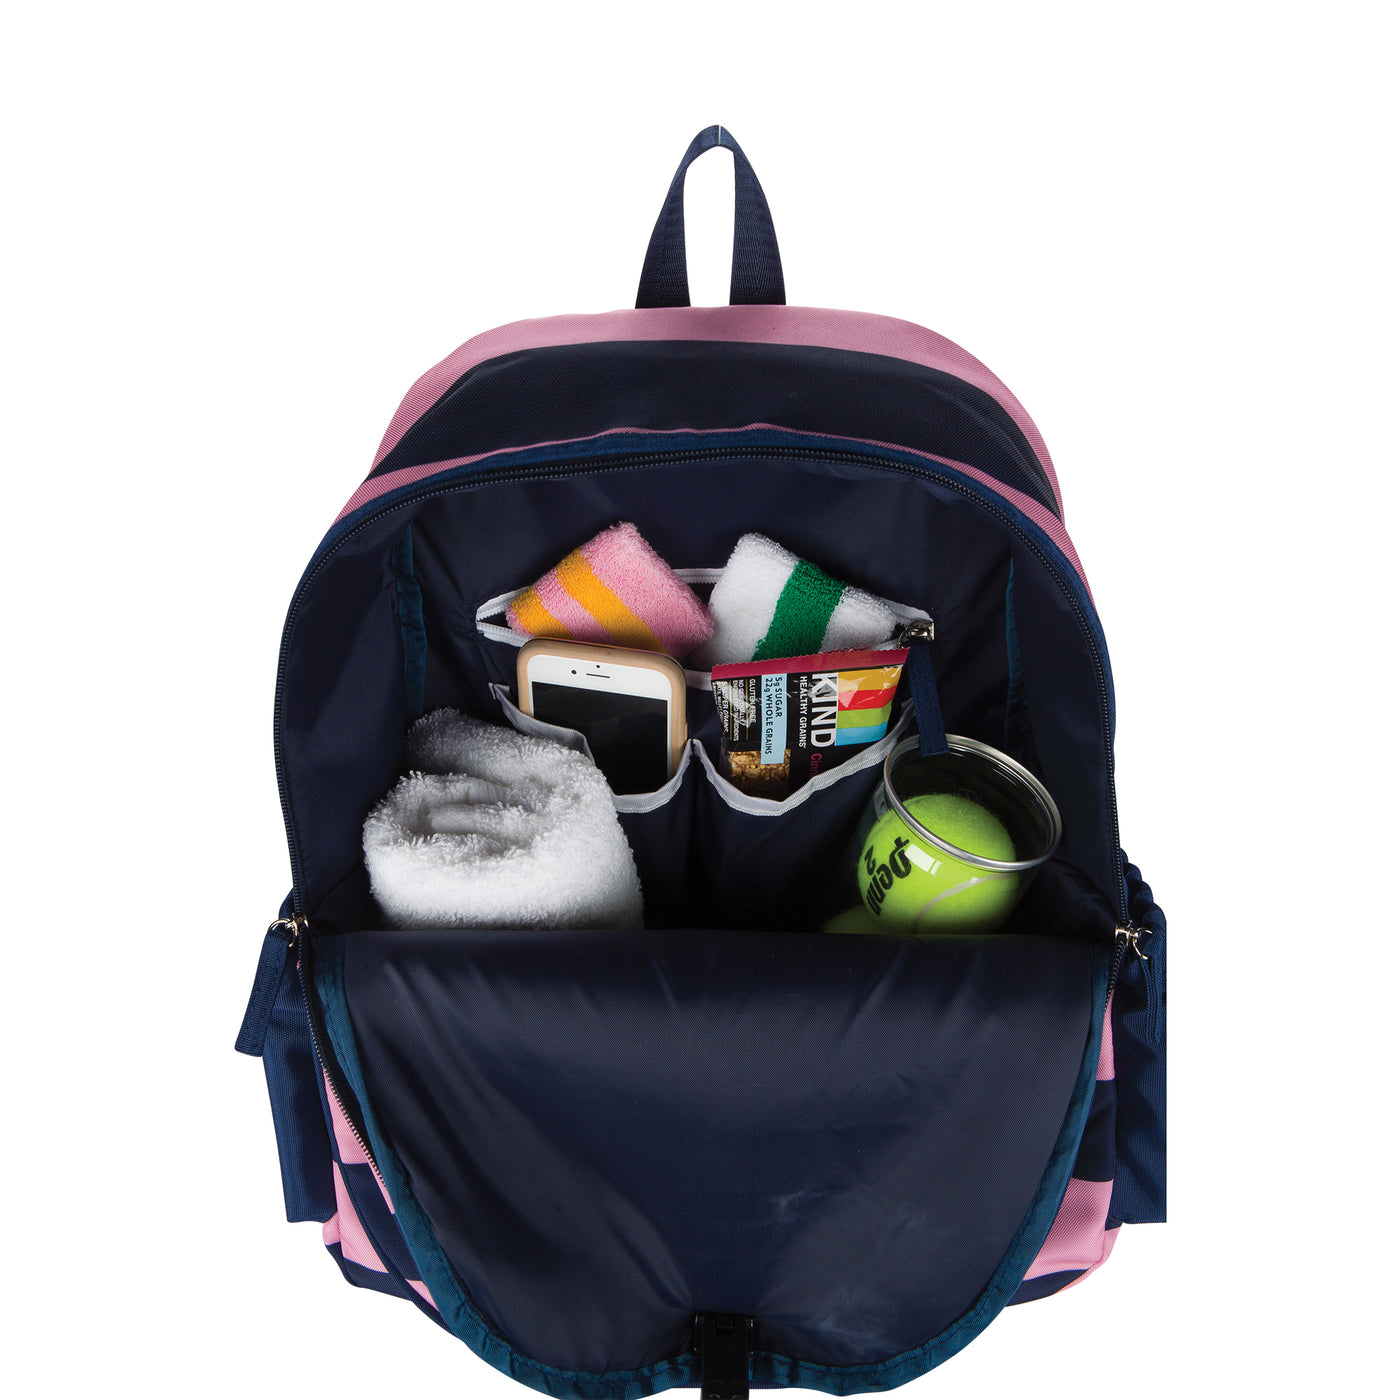 Inside view of navy and pink striped tennis backpack showing a tennis ball, phone, towel and granola bar inside the backpack.